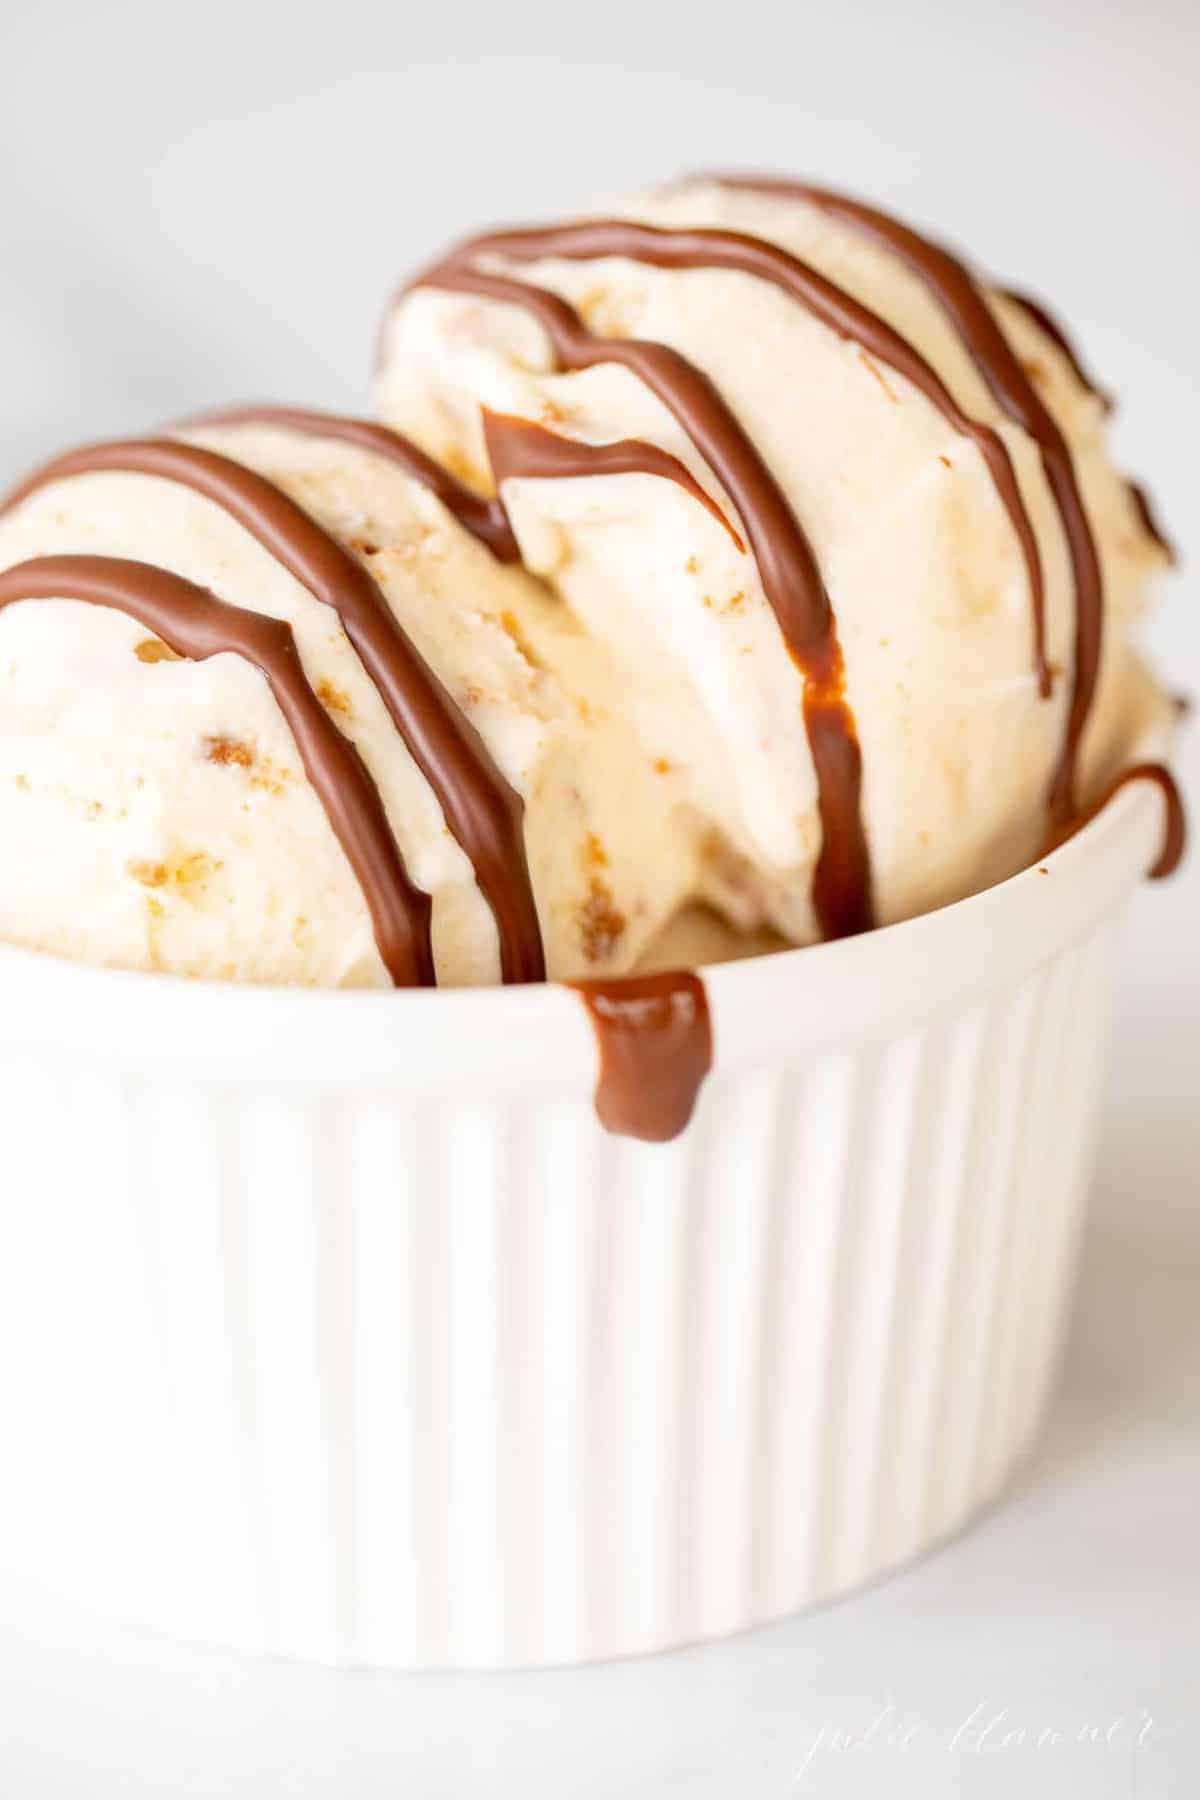 A white ramekin filled with vanilla ice cream and covered with dripping chocolate homemade magic shell.